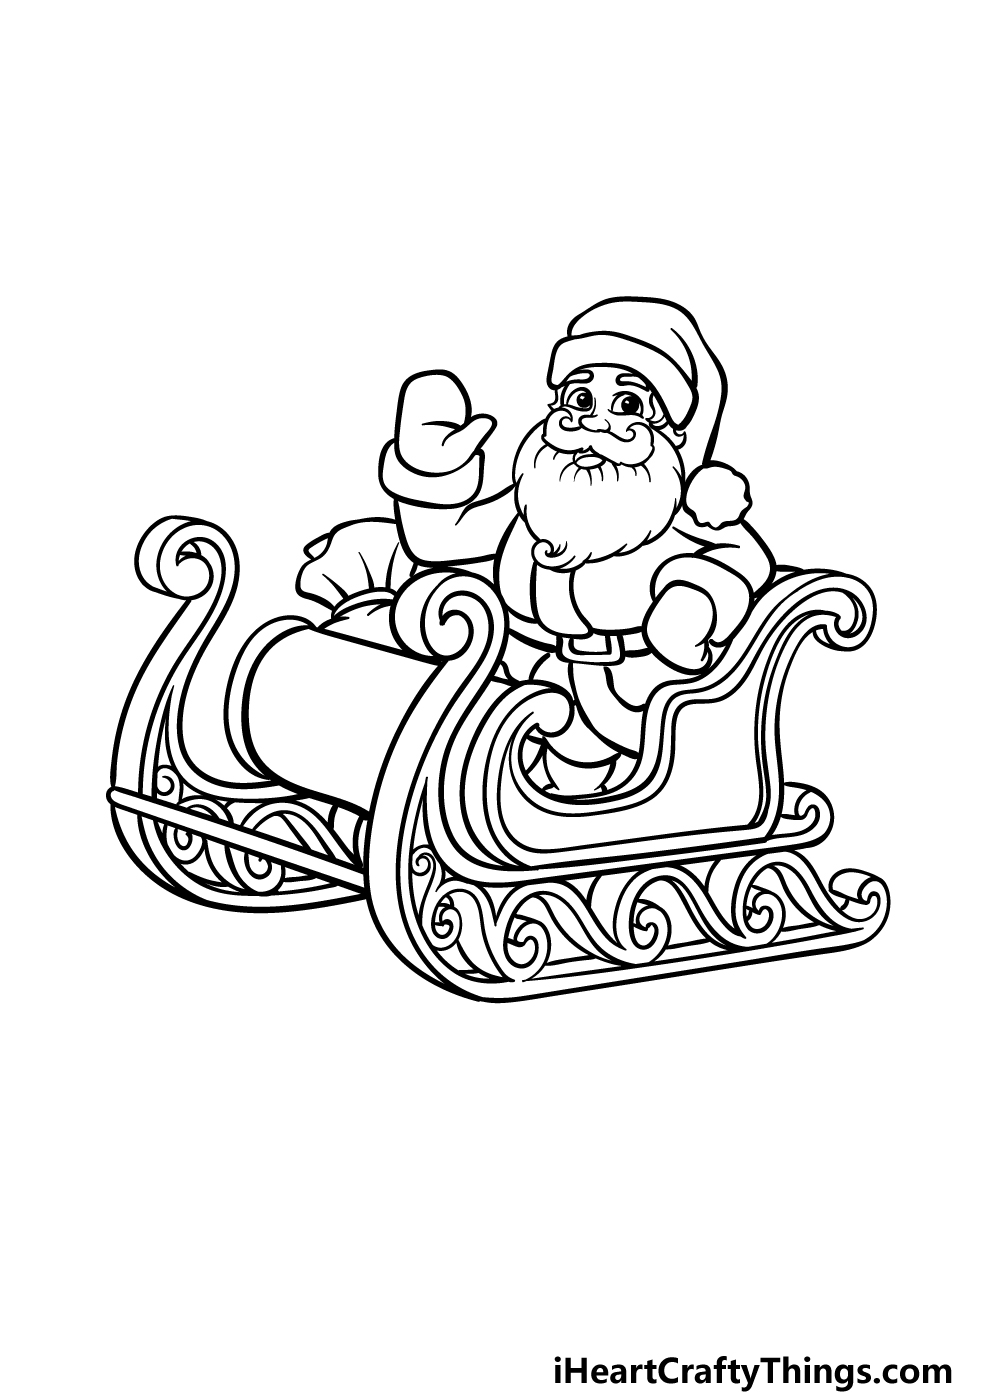 Learn How to Draw Santa Sleigh (Christmas) Step by Step : Drawing Tutorials